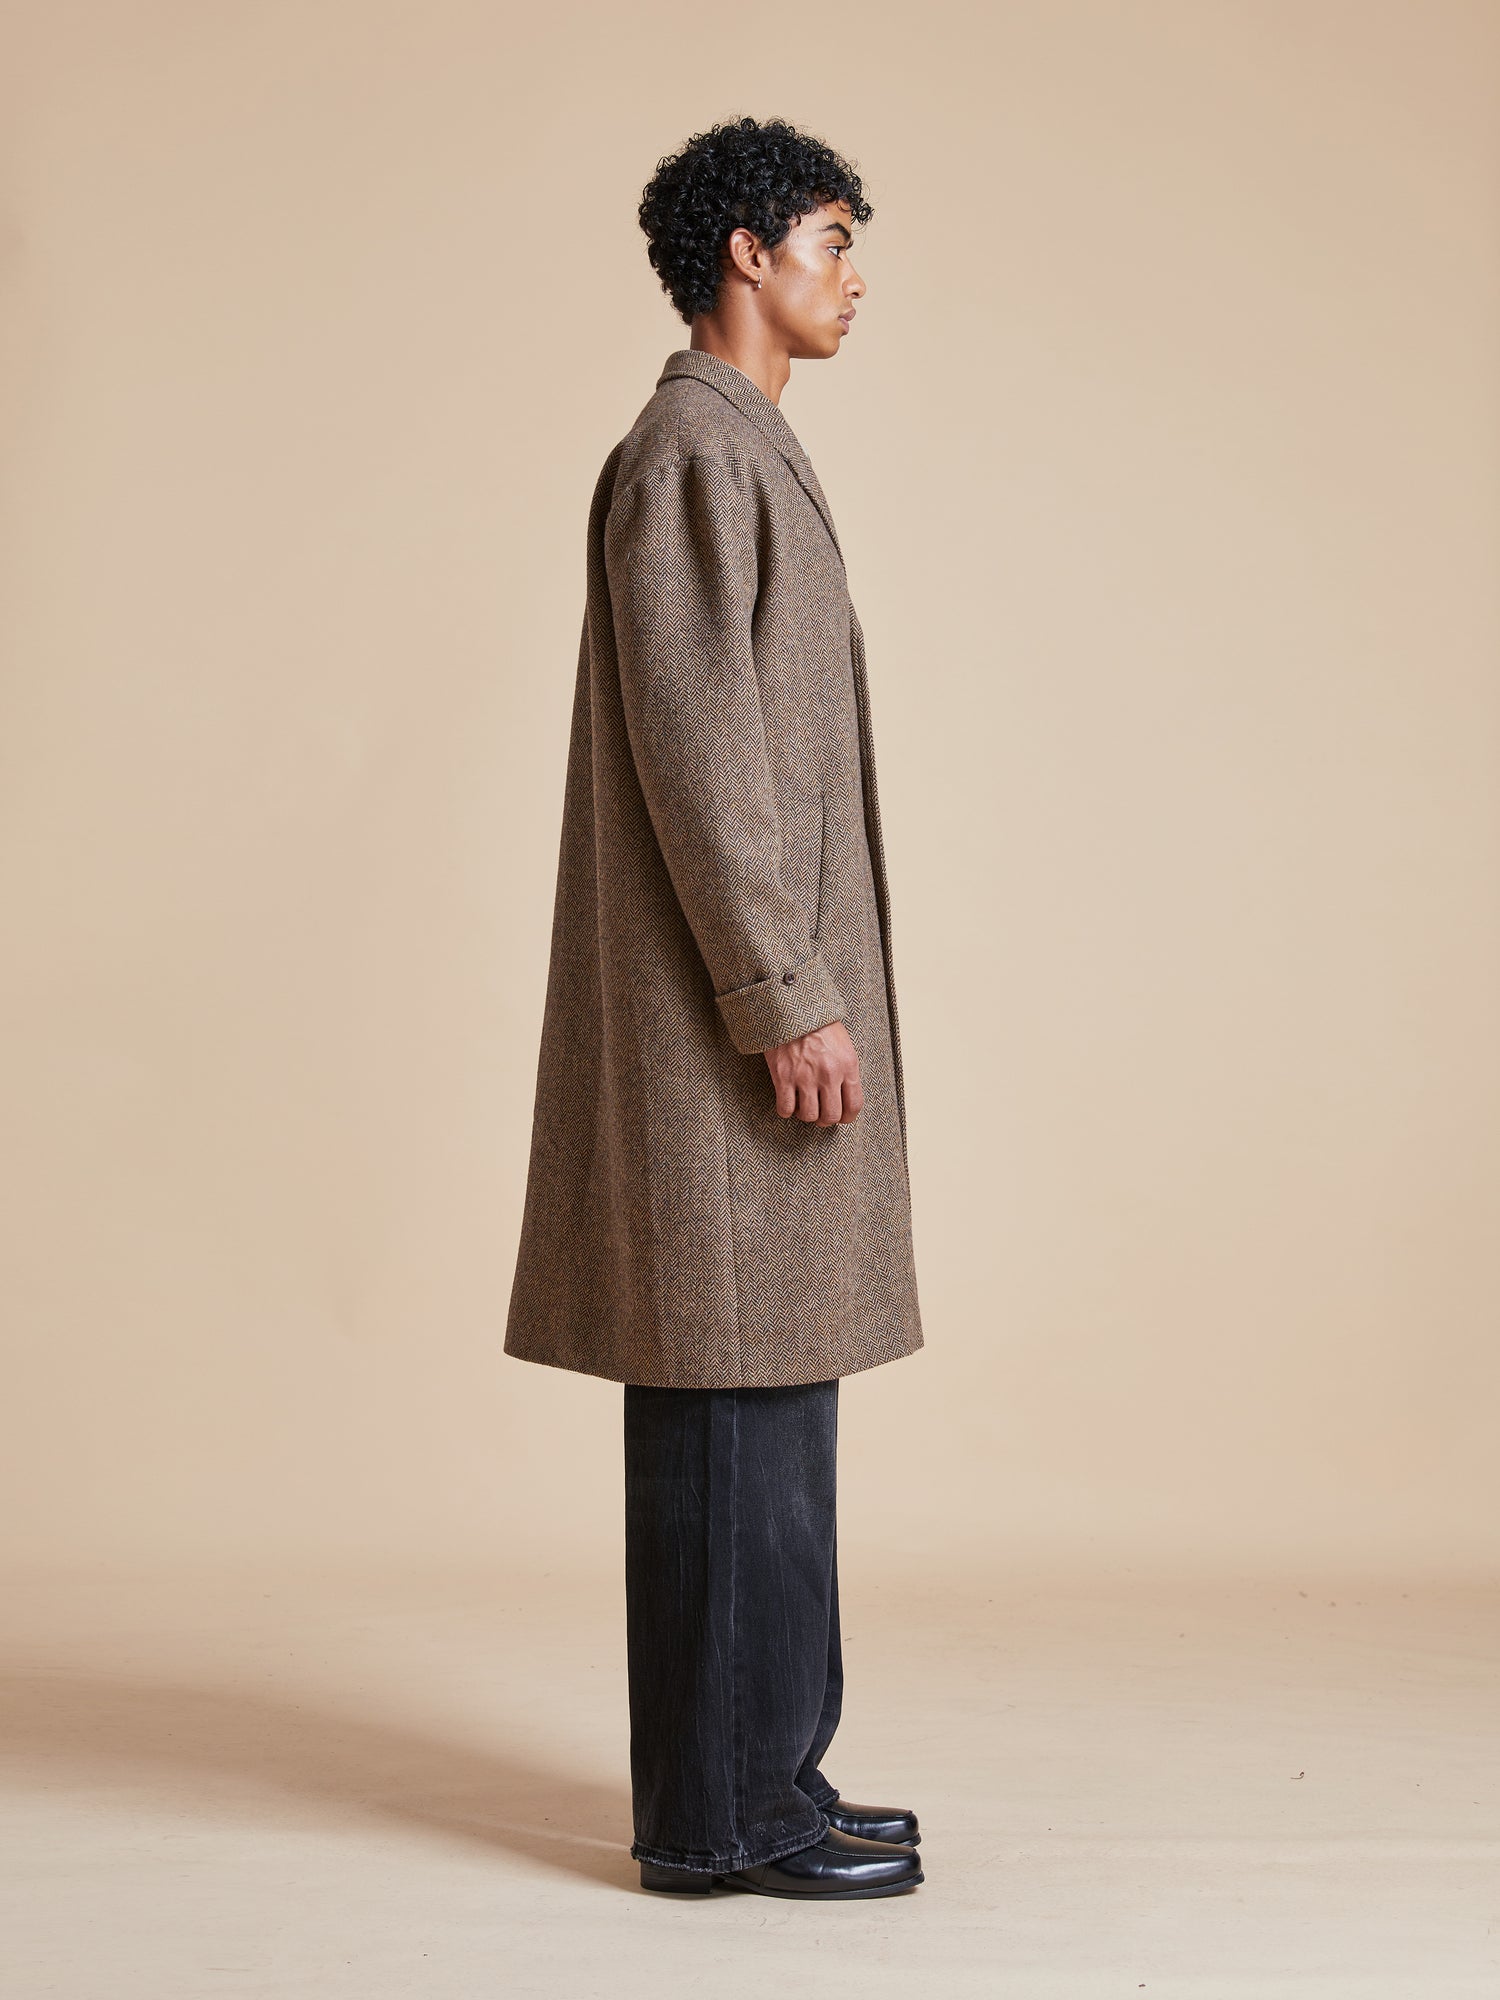 The back view of a man wearing a Found Elm Tweed Long Top Coat.